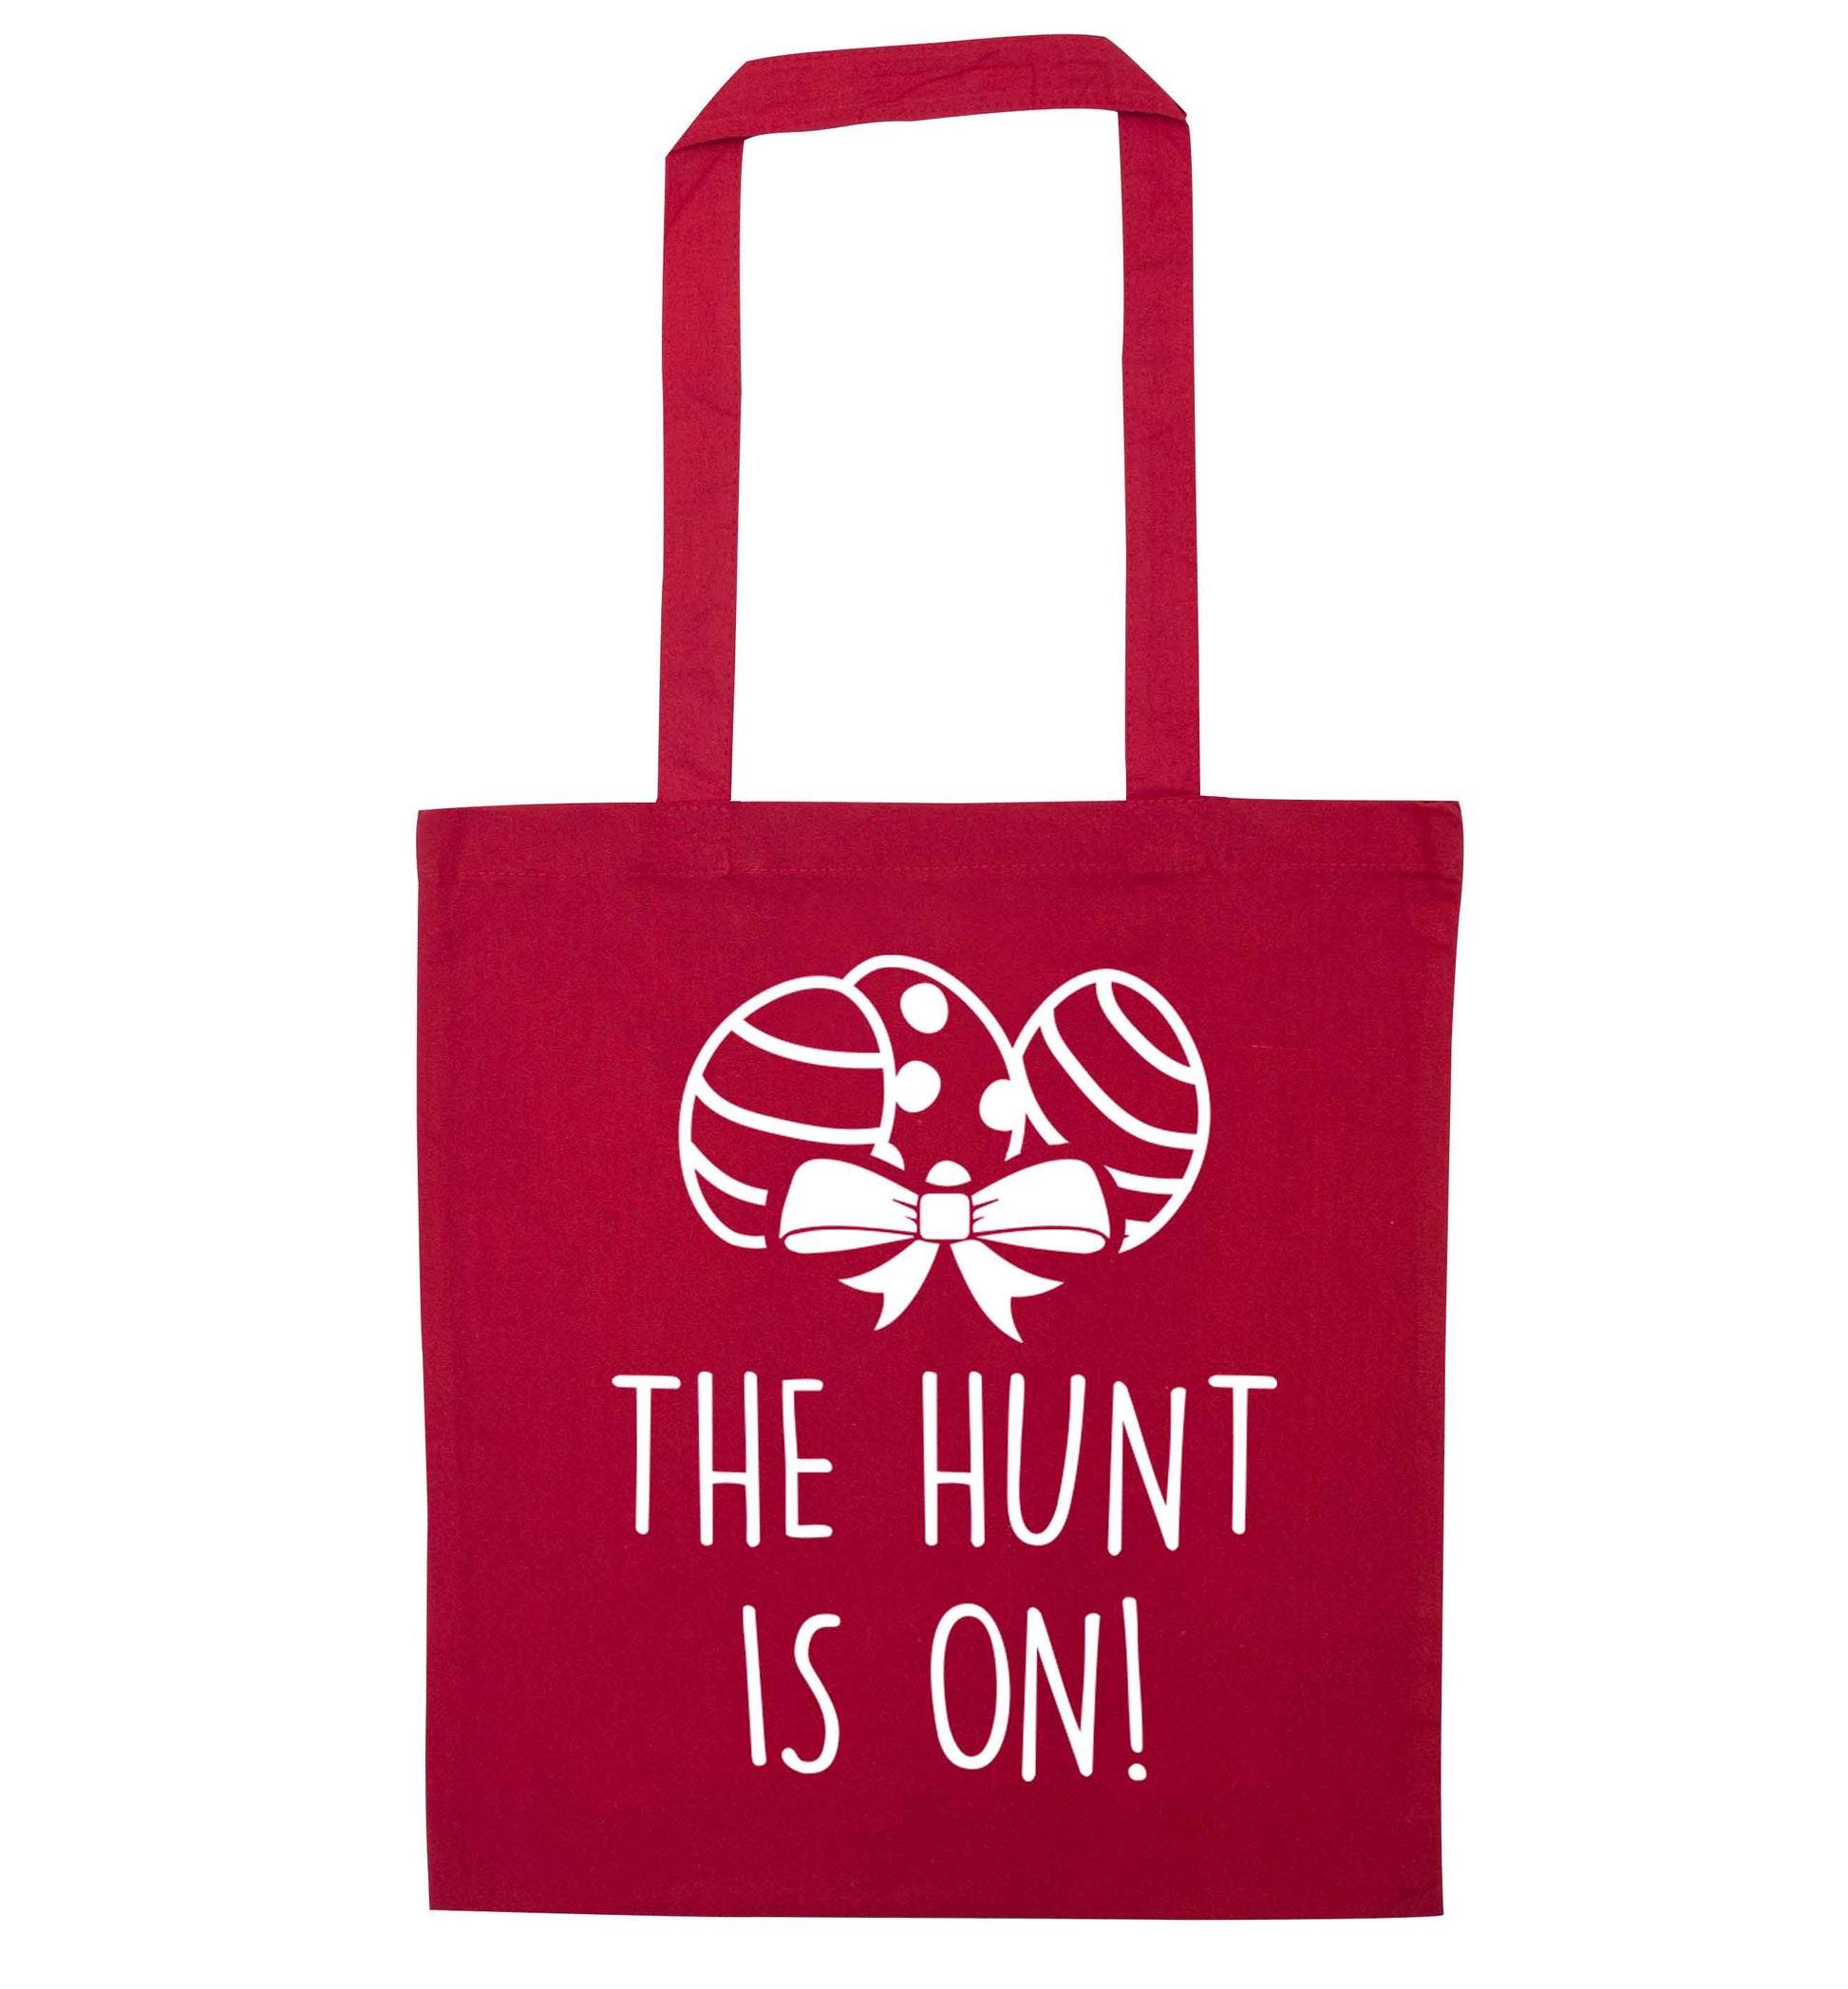 The hunt is on red tote bag